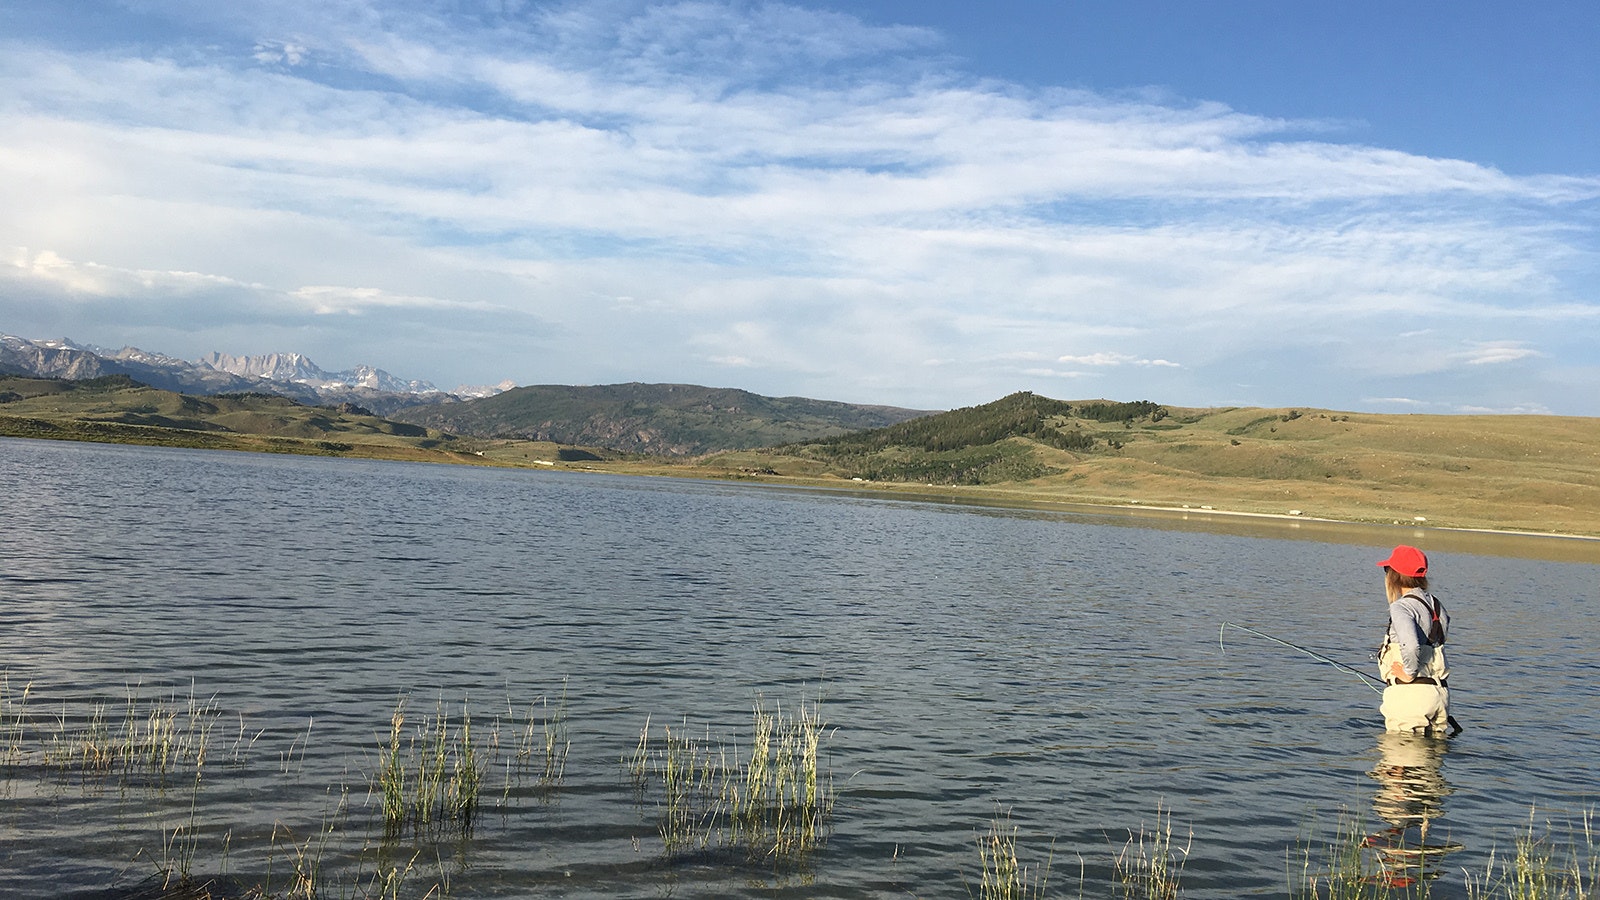 Soda Lake is just northeast of Pinedale and used to be one of Wyoming’s trout fishing hot spots. But lately, most of the fish died — either because of low water or algae — and almost nobody bothers going there anymore.